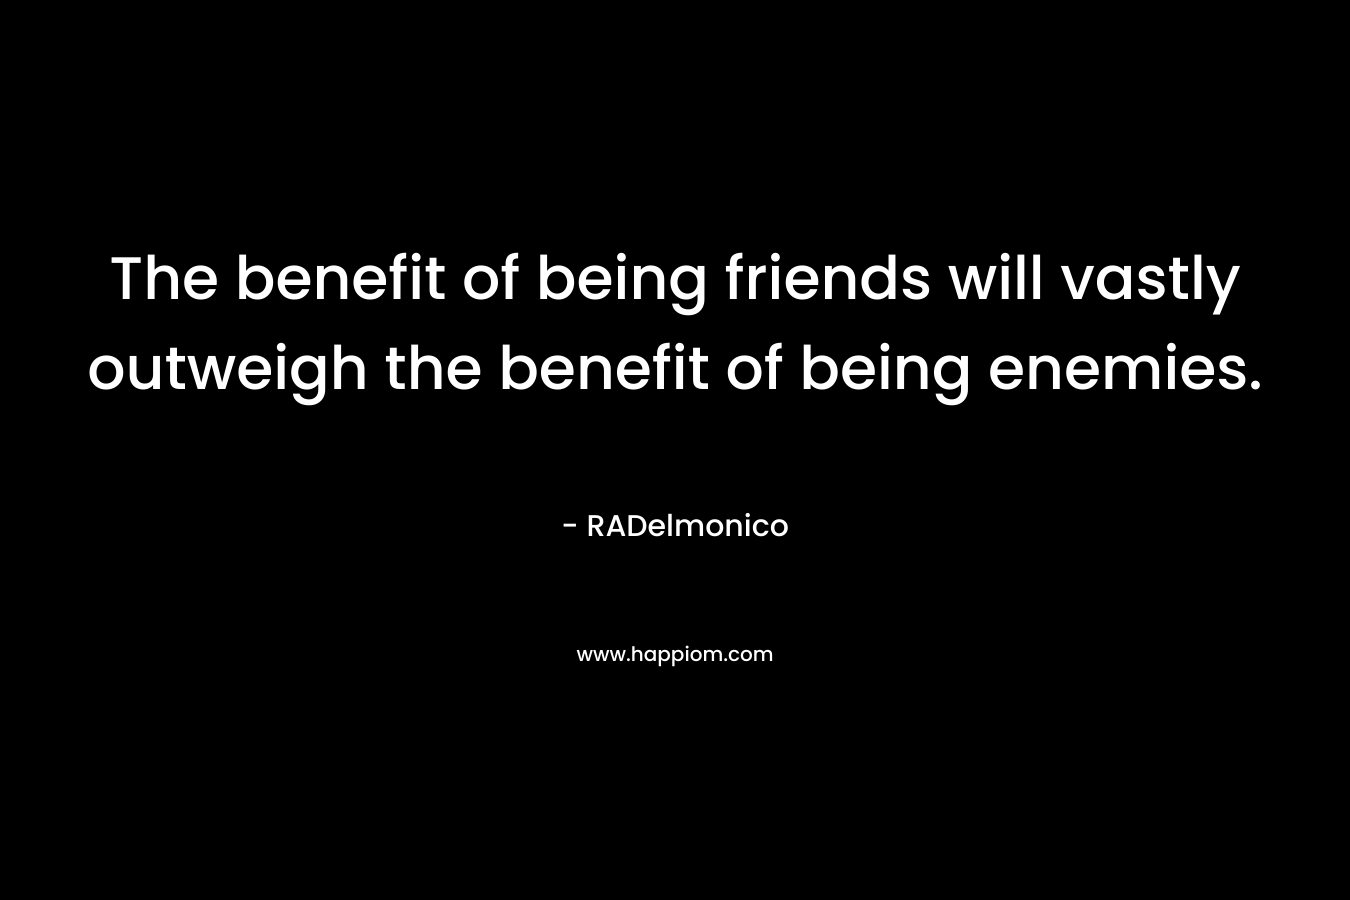 The benefit of being friends will vastly outweigh the benefit of being enemies.